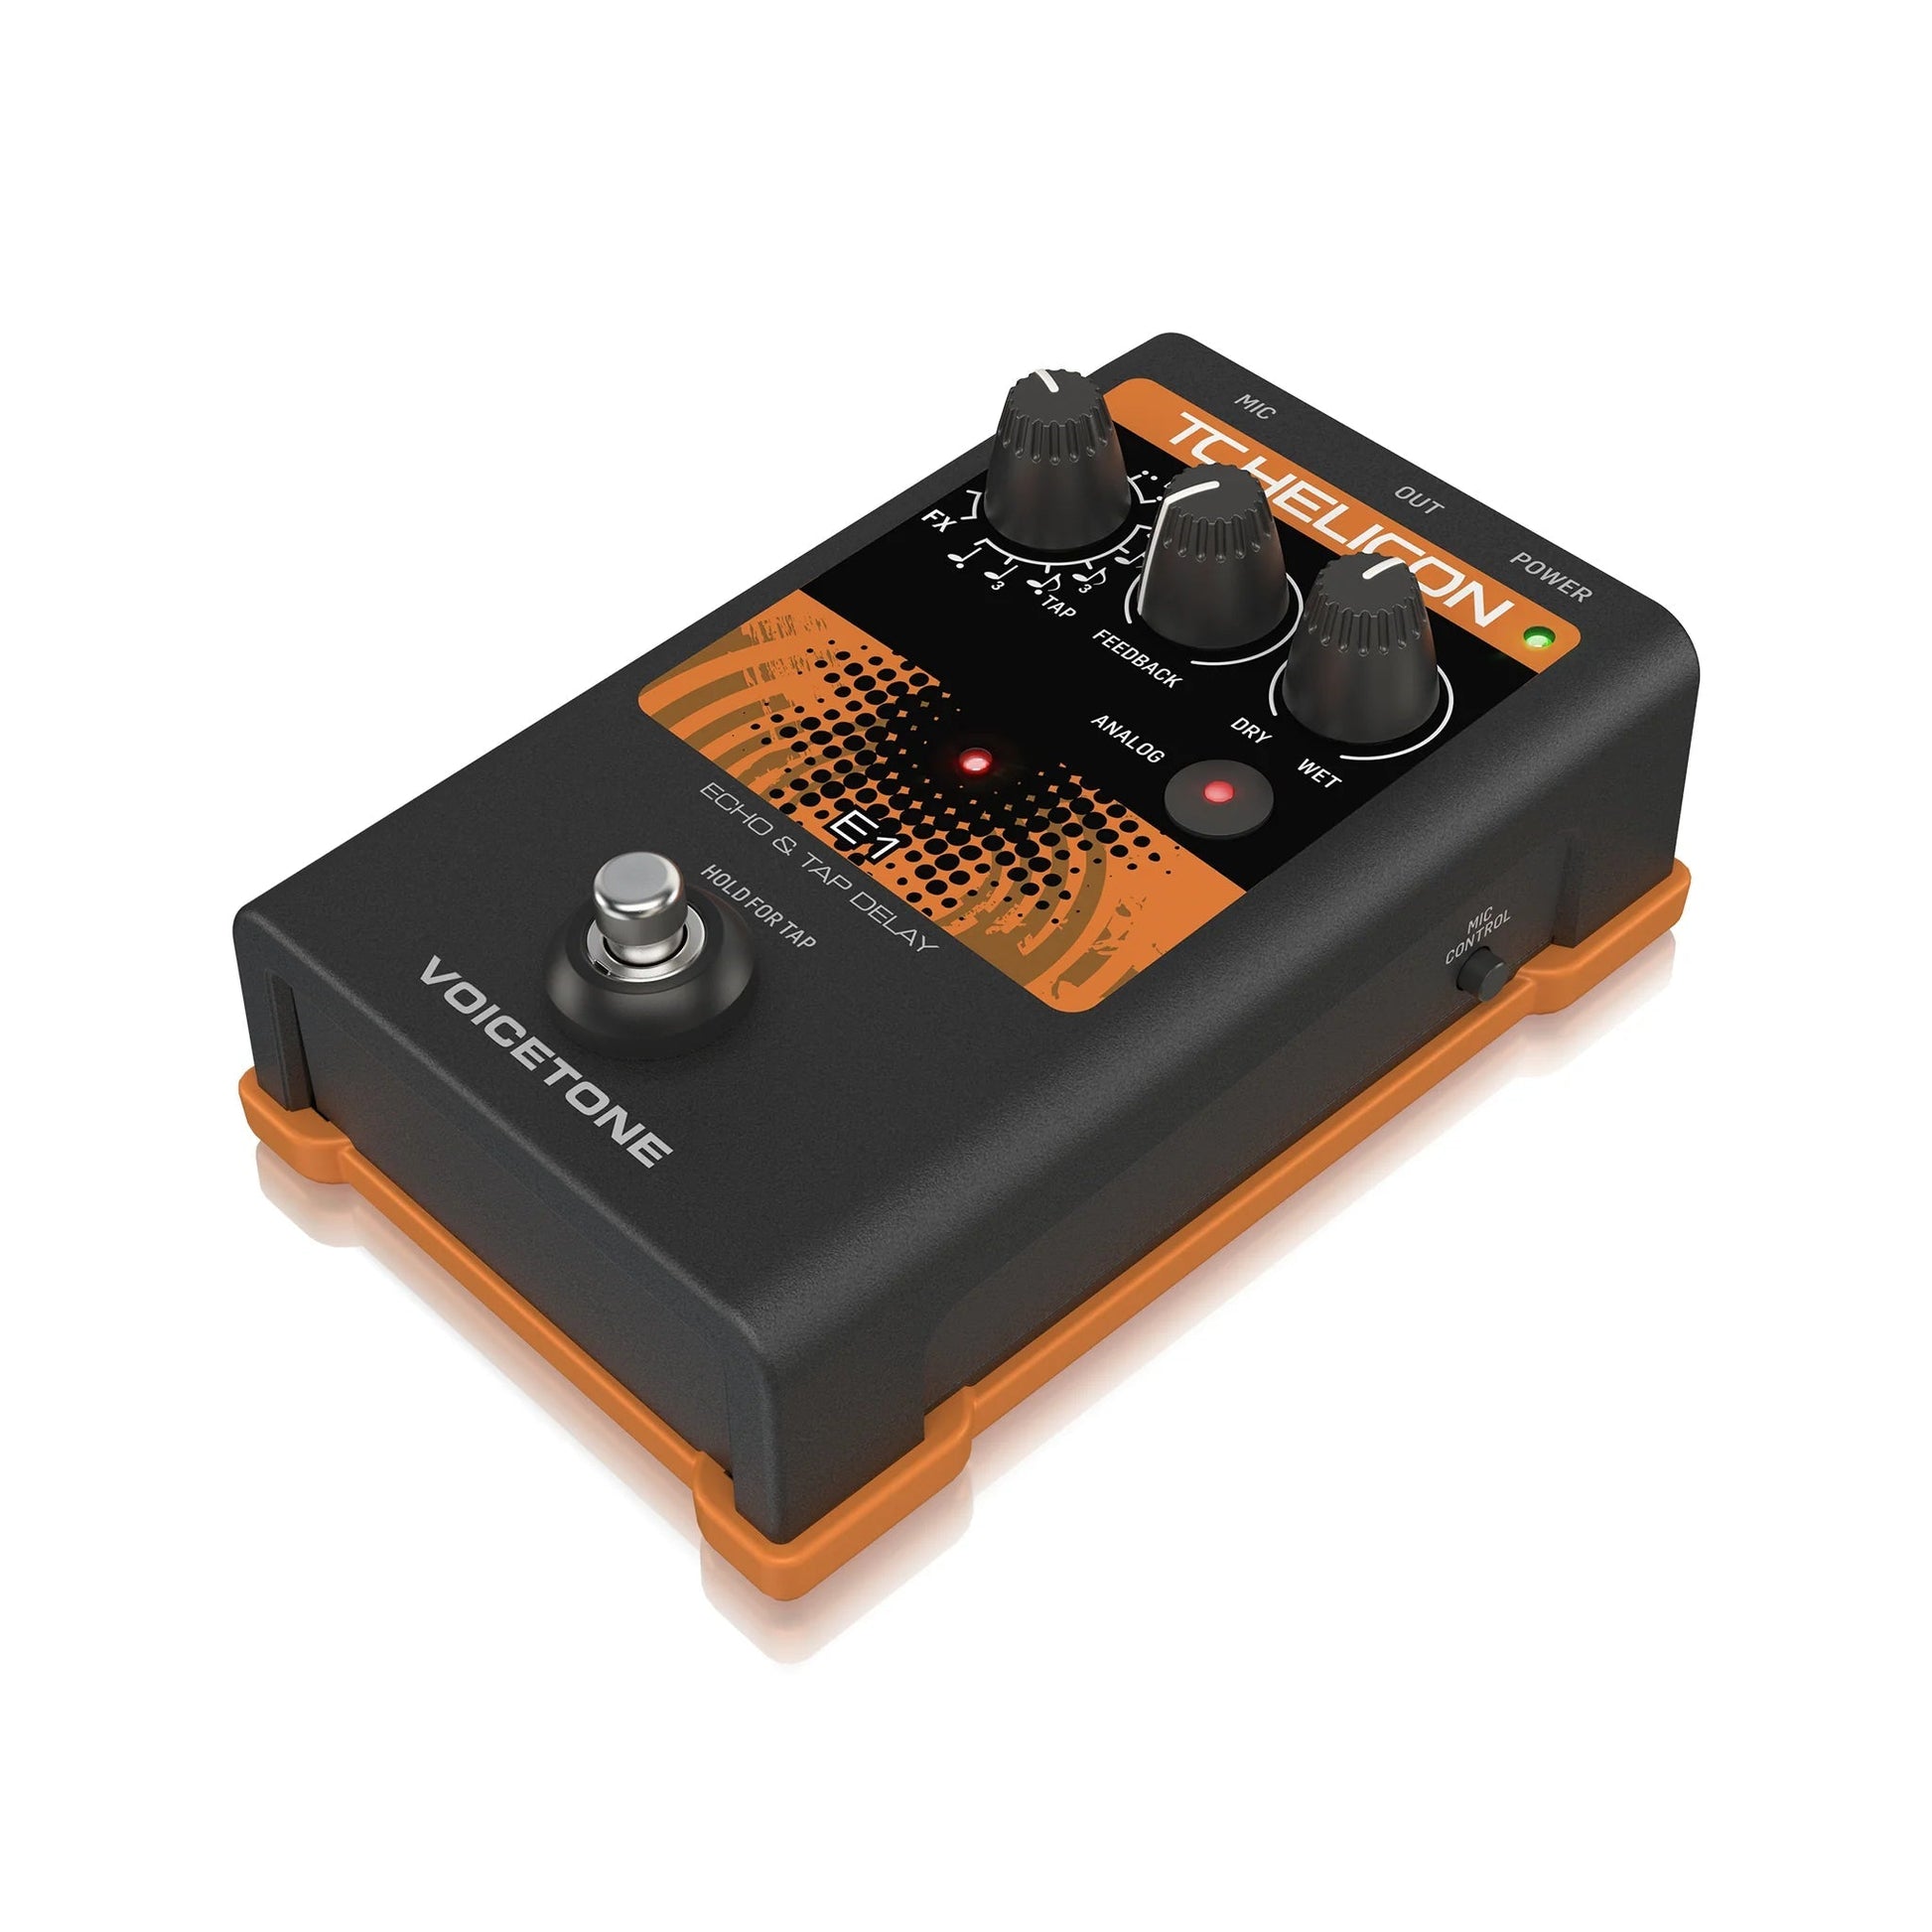 Pedal Guitar TC-Helicon VoiceTone E1 Echo and Tap Delay Vocal - Việt Music